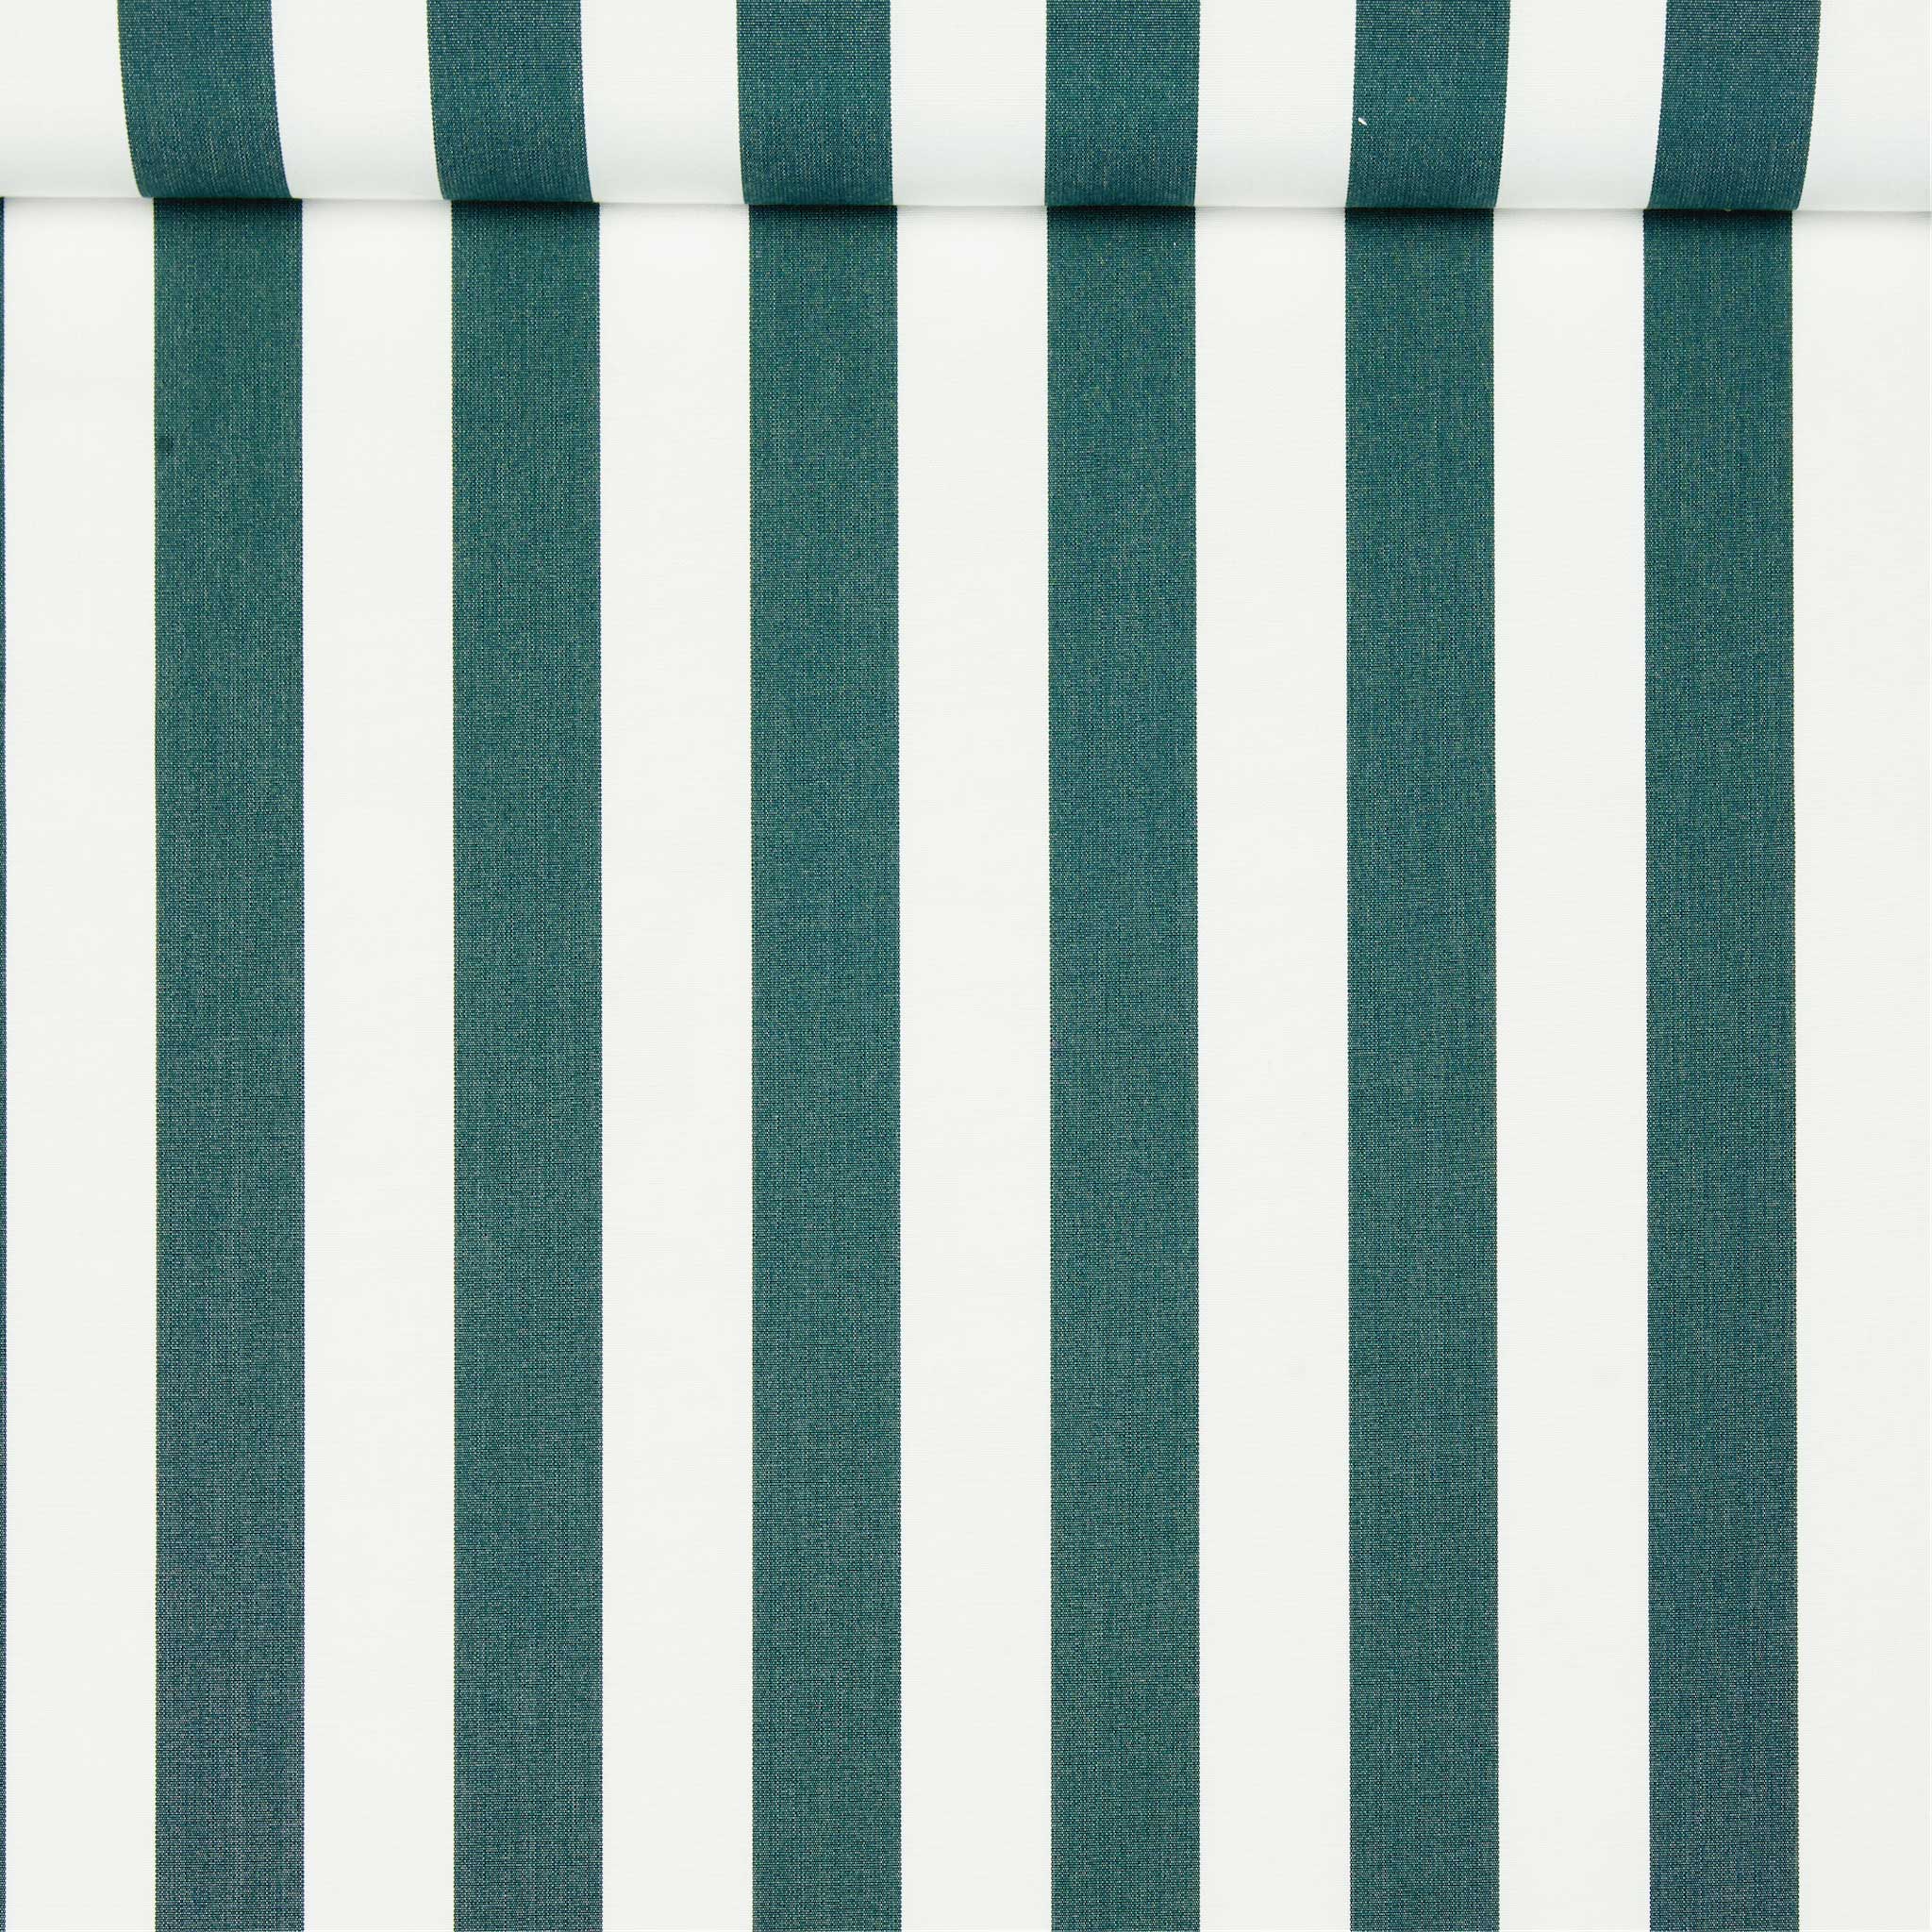 A birds eye view of a jacquard woven green and white striped pattern outdoor performance fabric roll. 